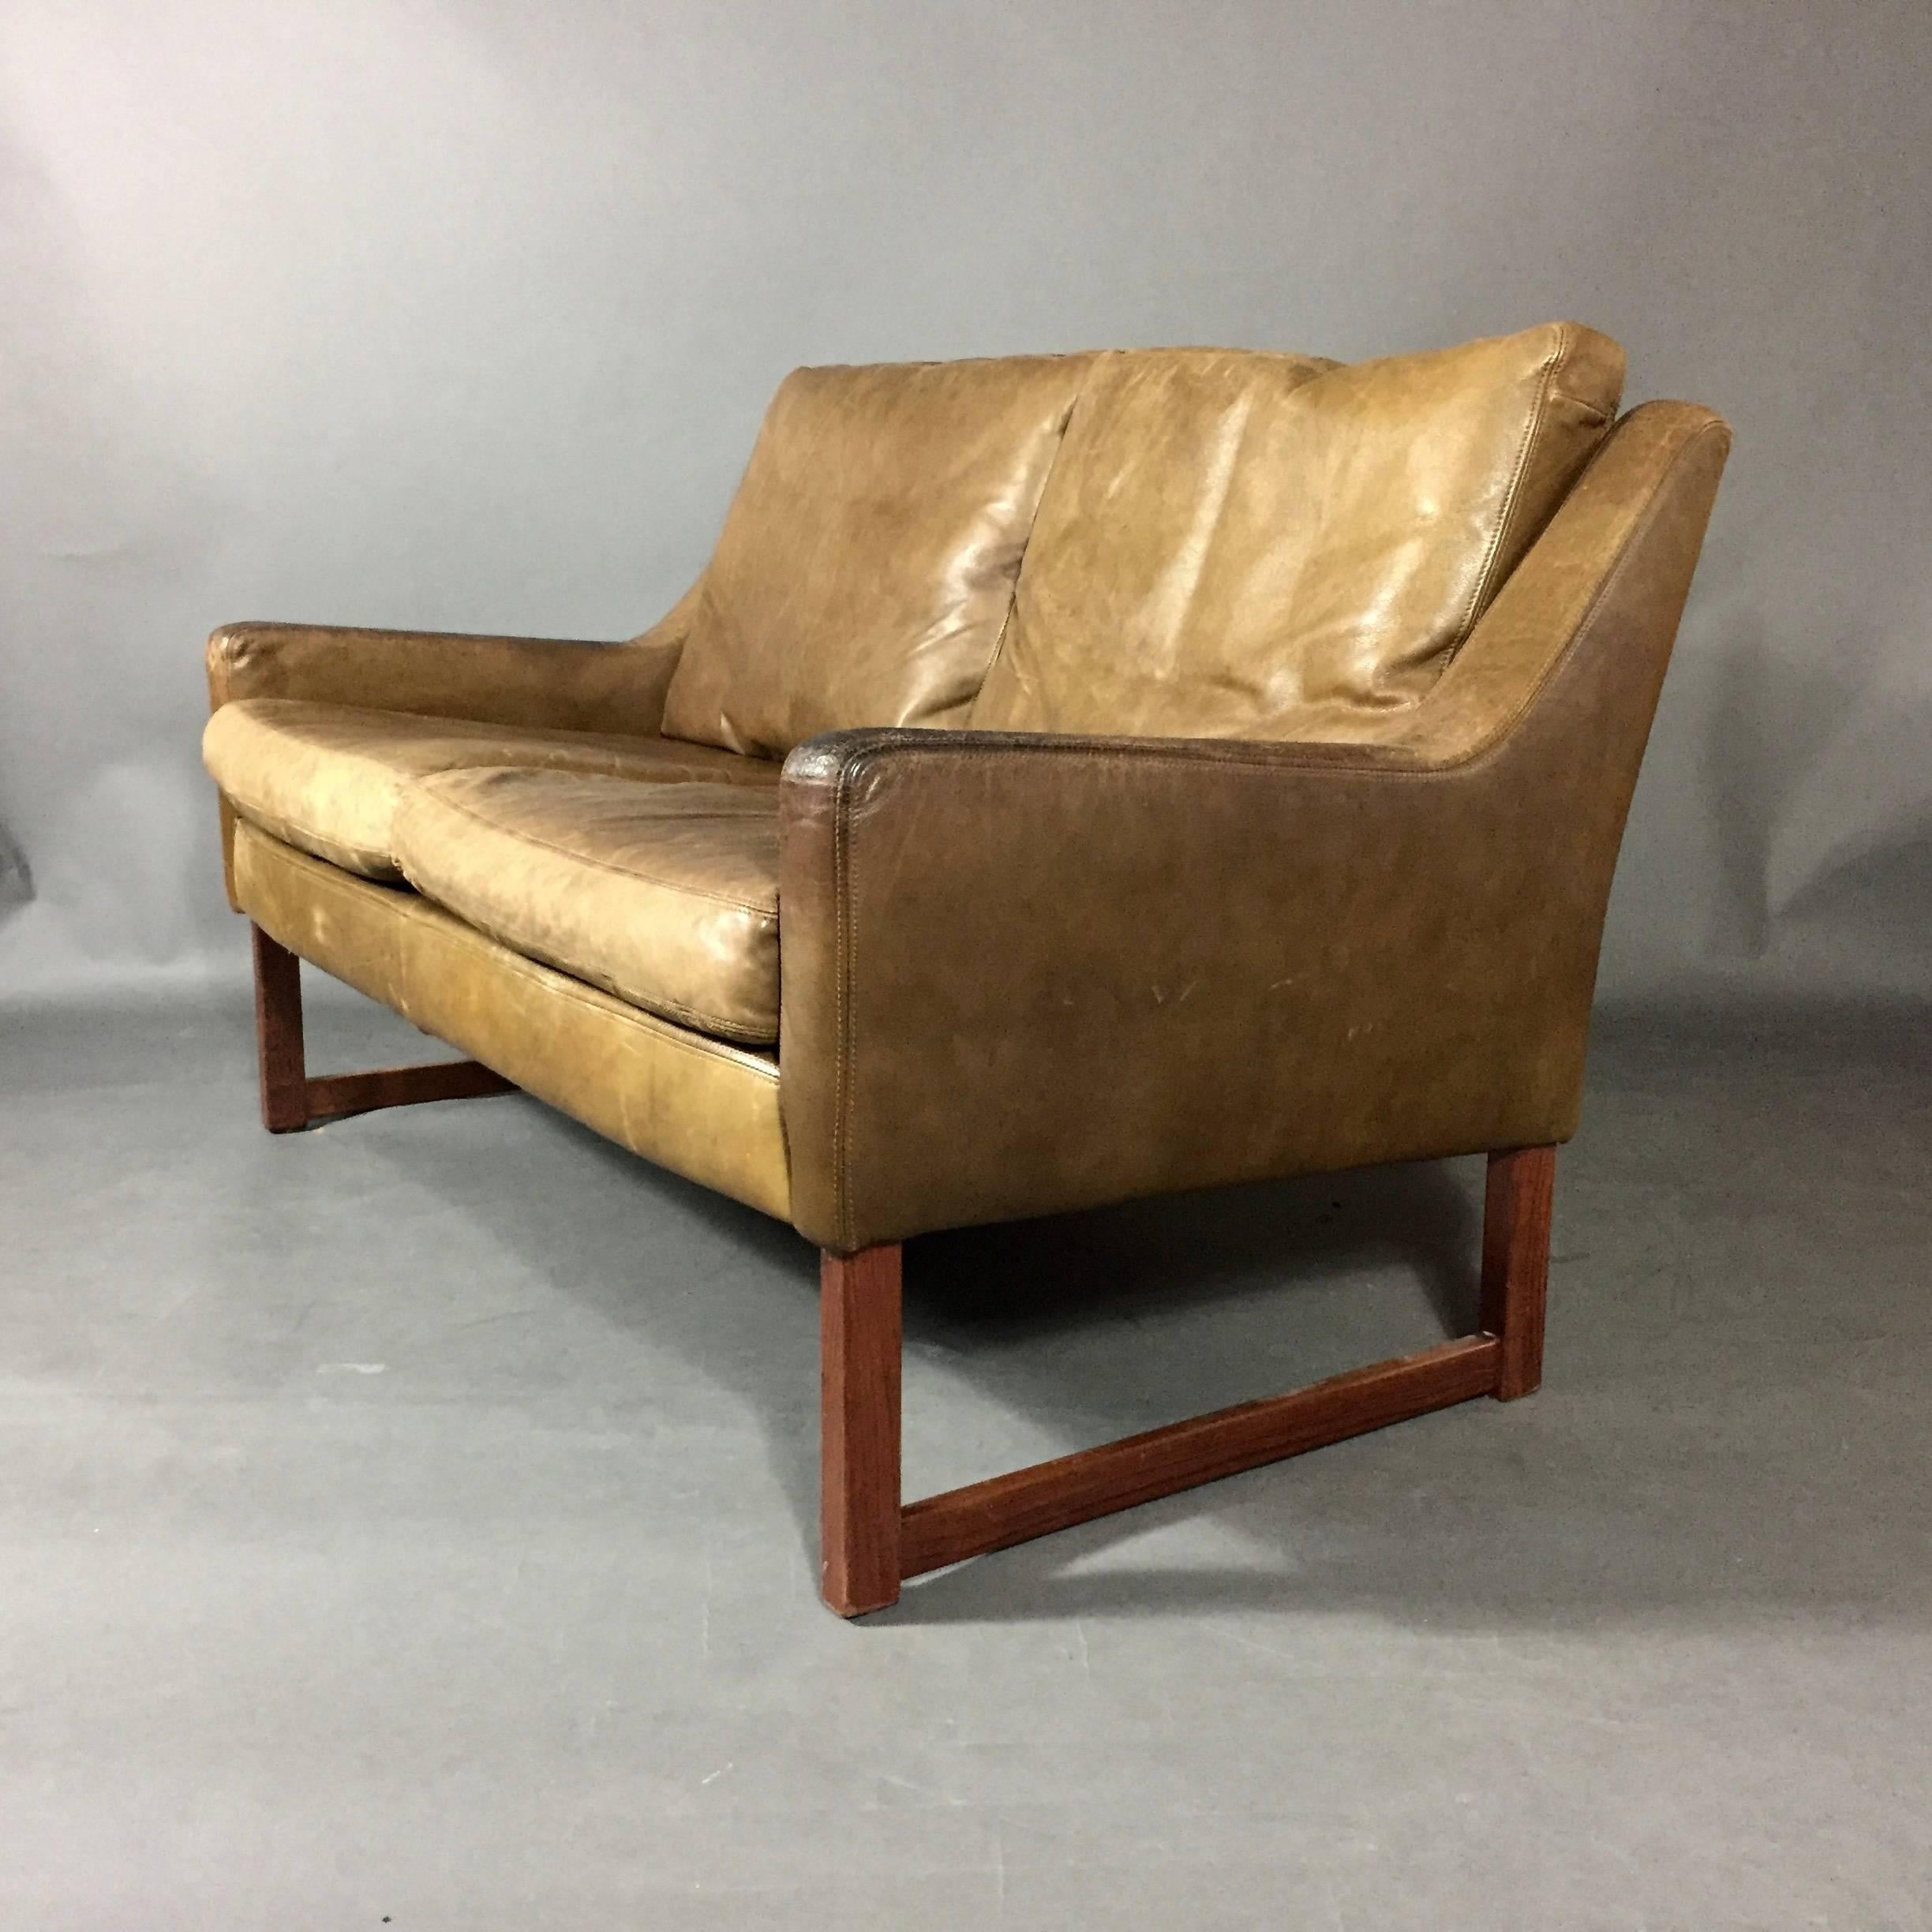 This perfectly sized two-seat sofa is designed with wide leather weave straps on loose cushions and on full back. Cushions are reversible to display smooth brown leather with perfect vintage patina. Square-frame legs provided added stability and a